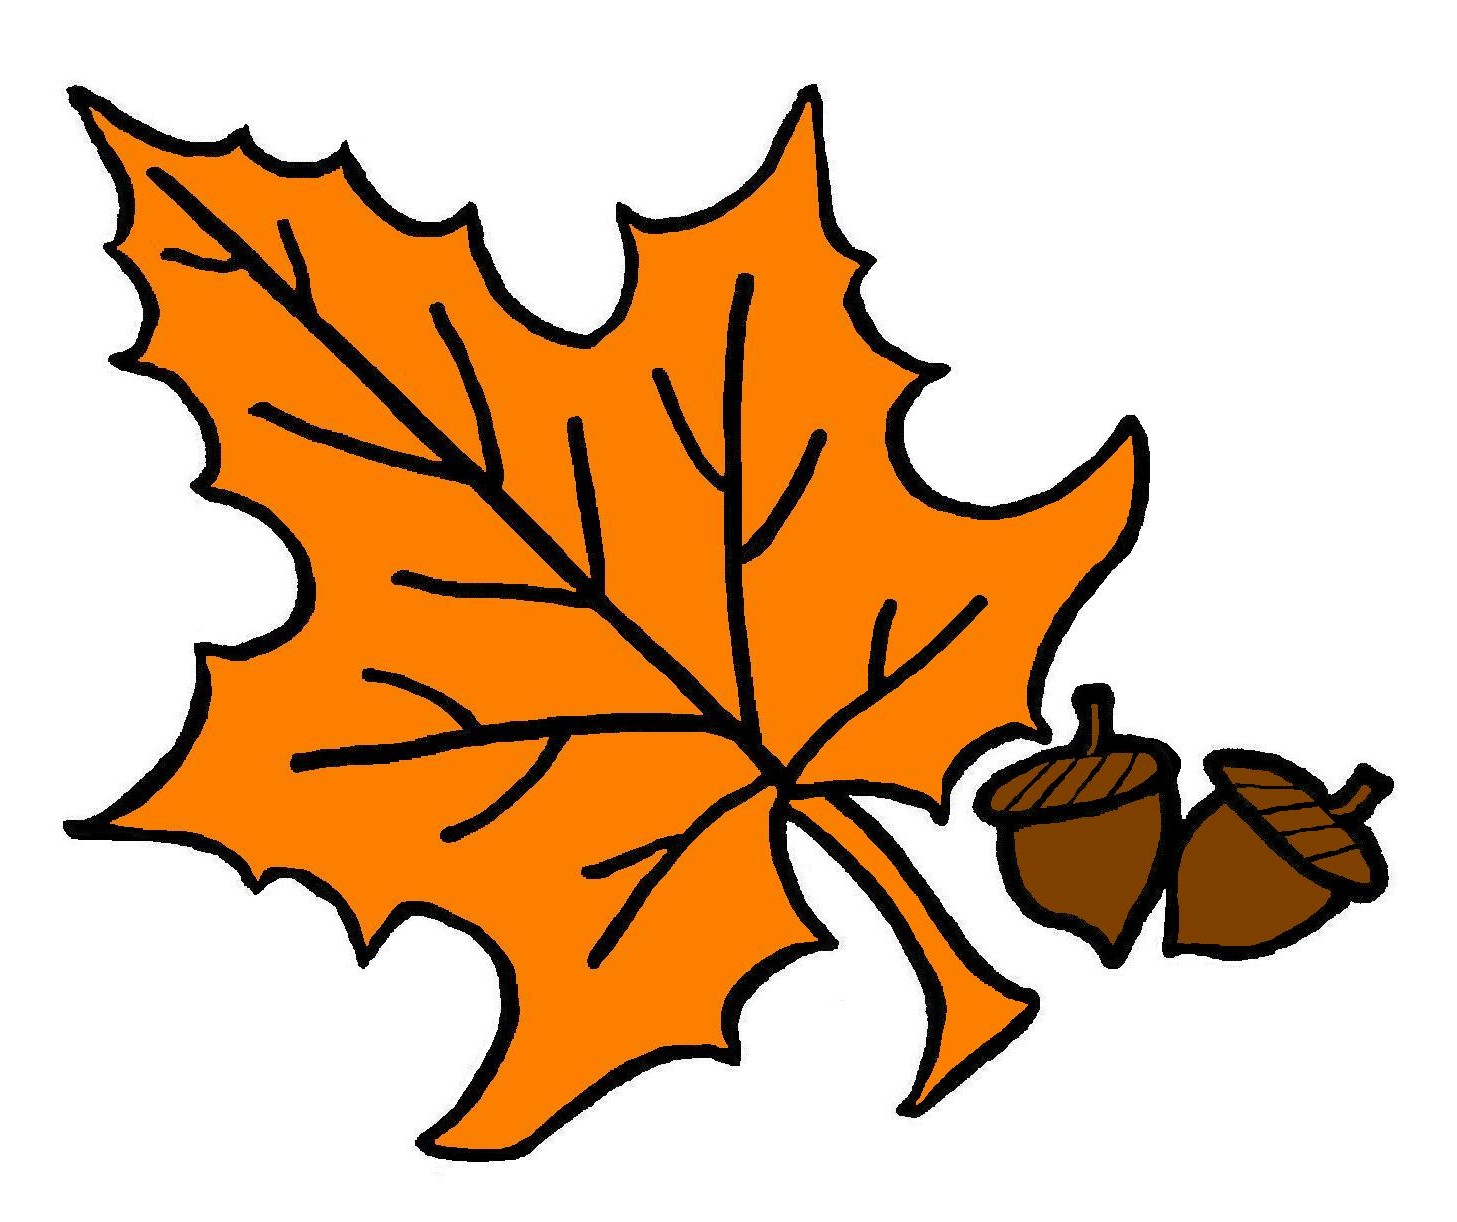 Fall leaves tree with autumn leaves illustrationlor clip art 2